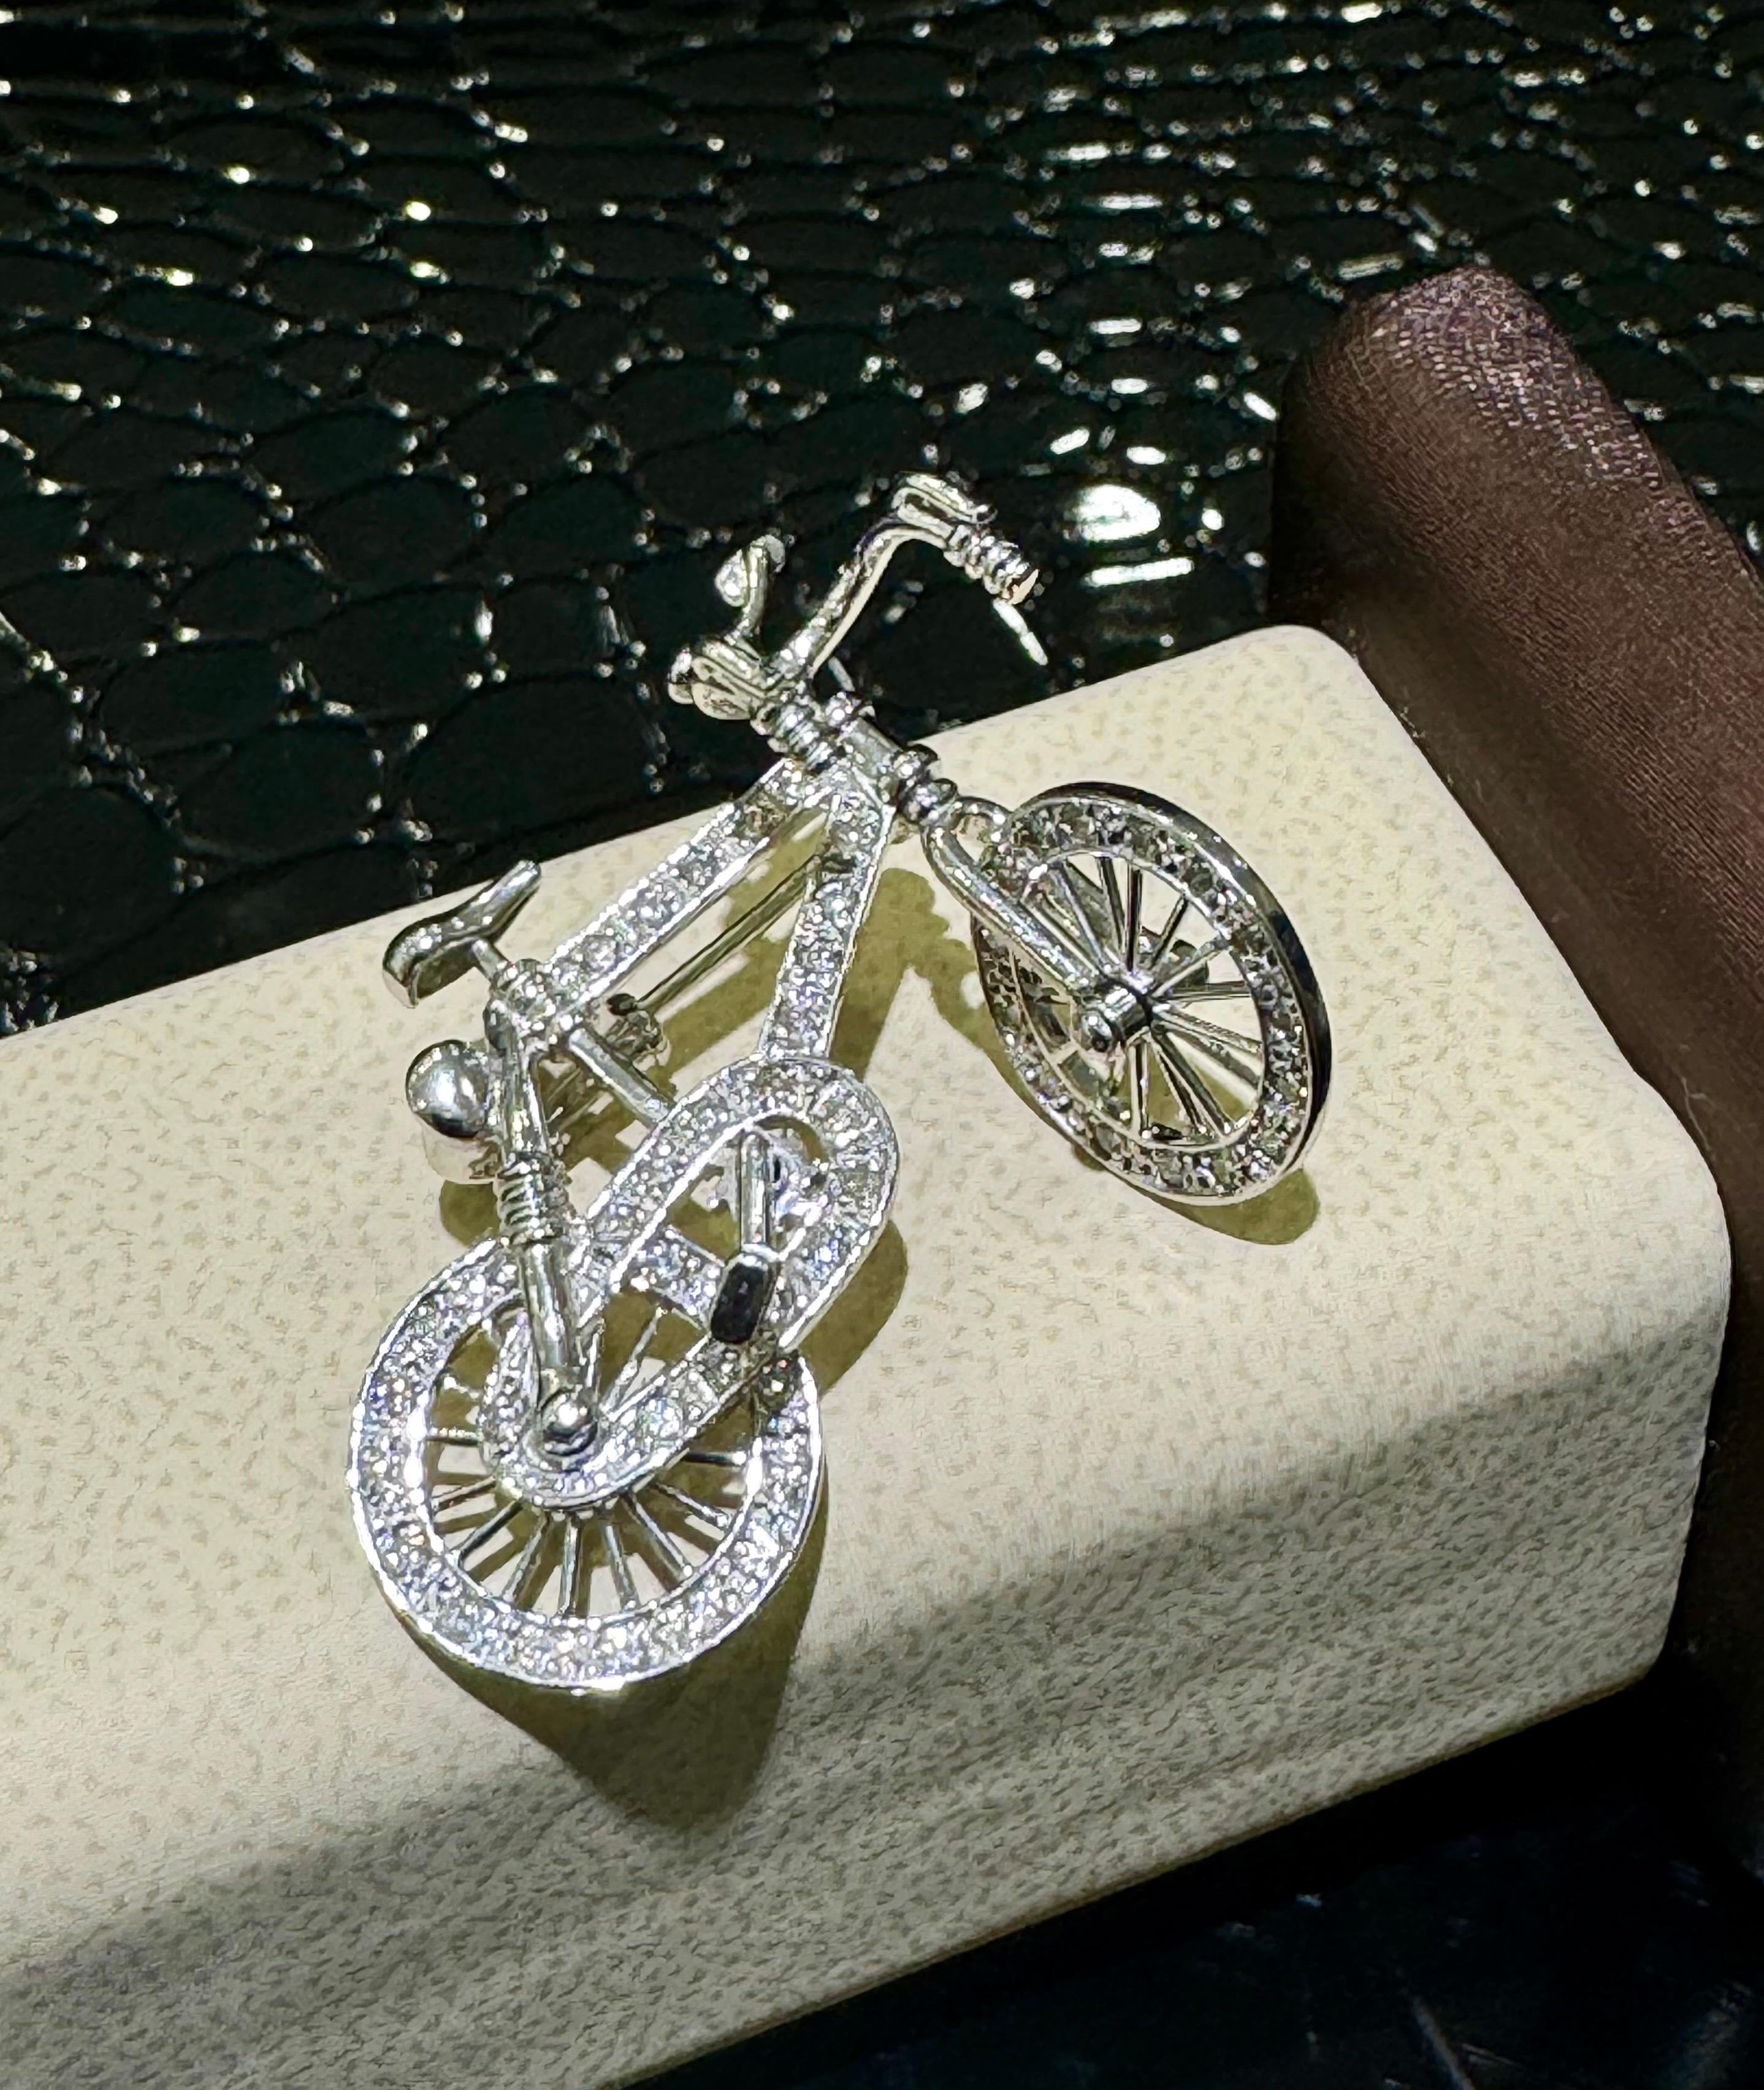 Absolutely Incredible And Unique Diamond Bicycle Broach/Pin In 18k White Gold .

Both wheels, steering wheel and pedals are moving!

Approximately 0.50 carats in diamonds.

Length of the bike is approximately 1 3/8”,

Height is approximately 1”